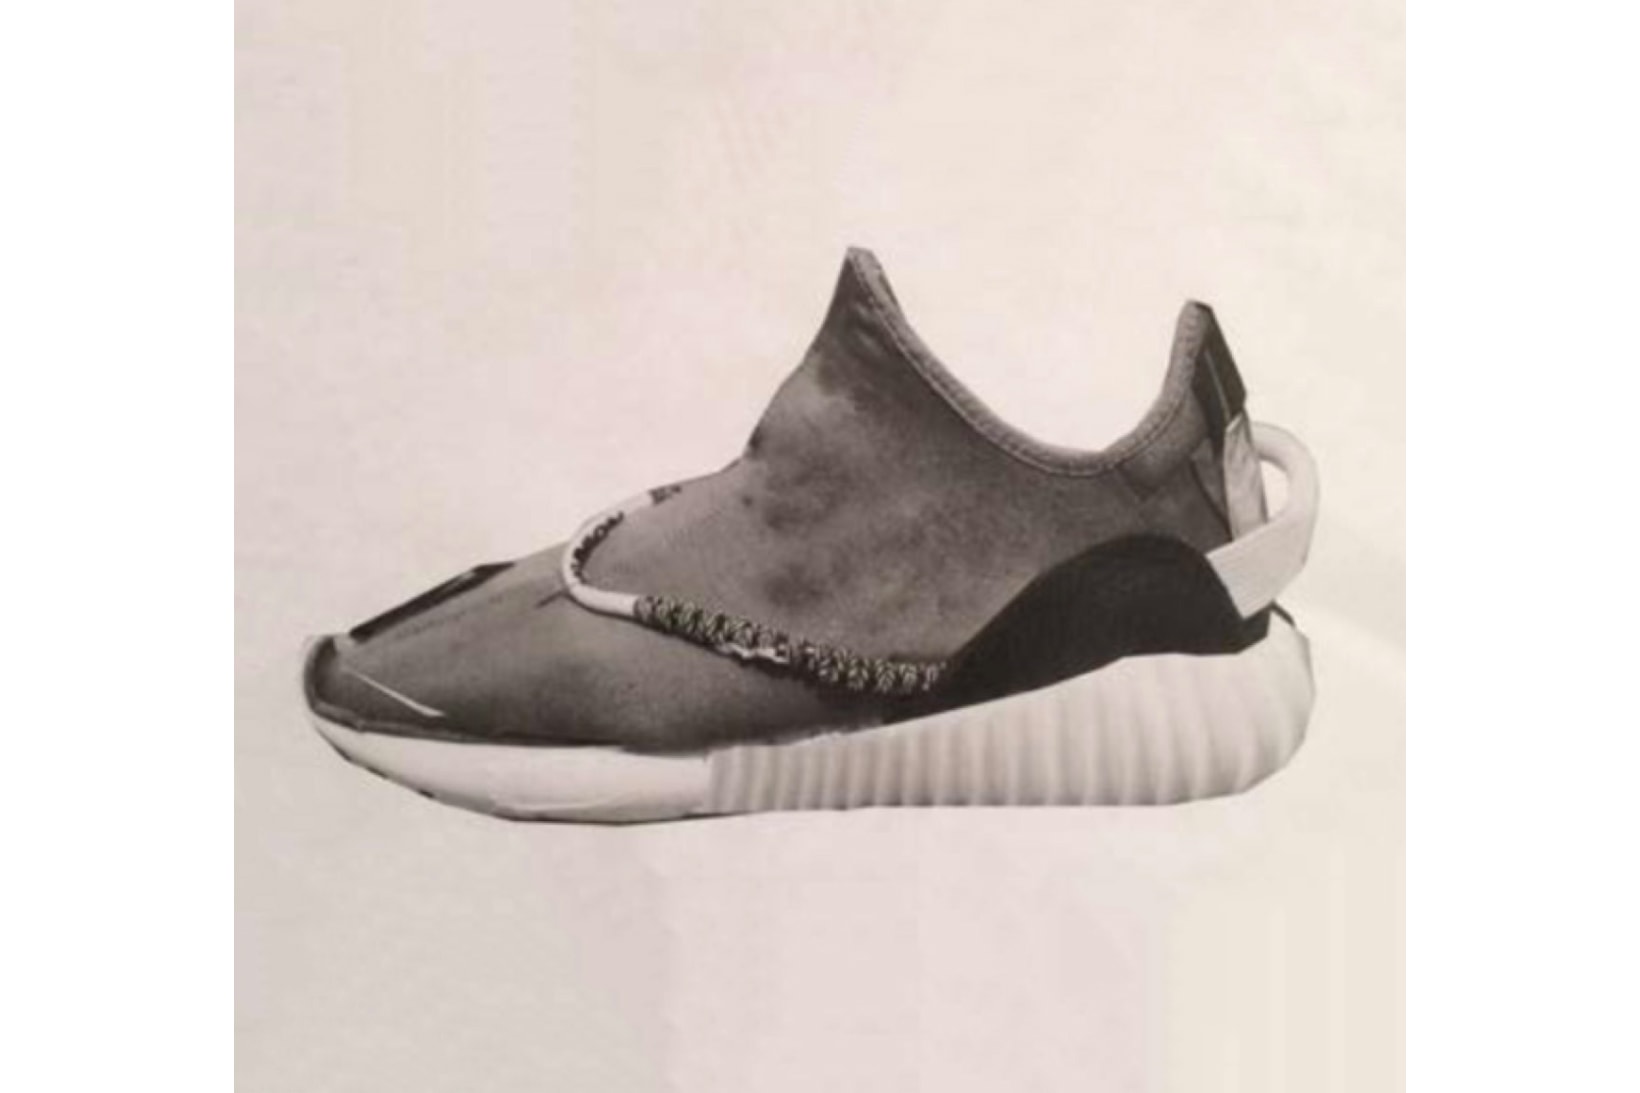 Kanye West Twitter YEEZY Shoes Design Reveal